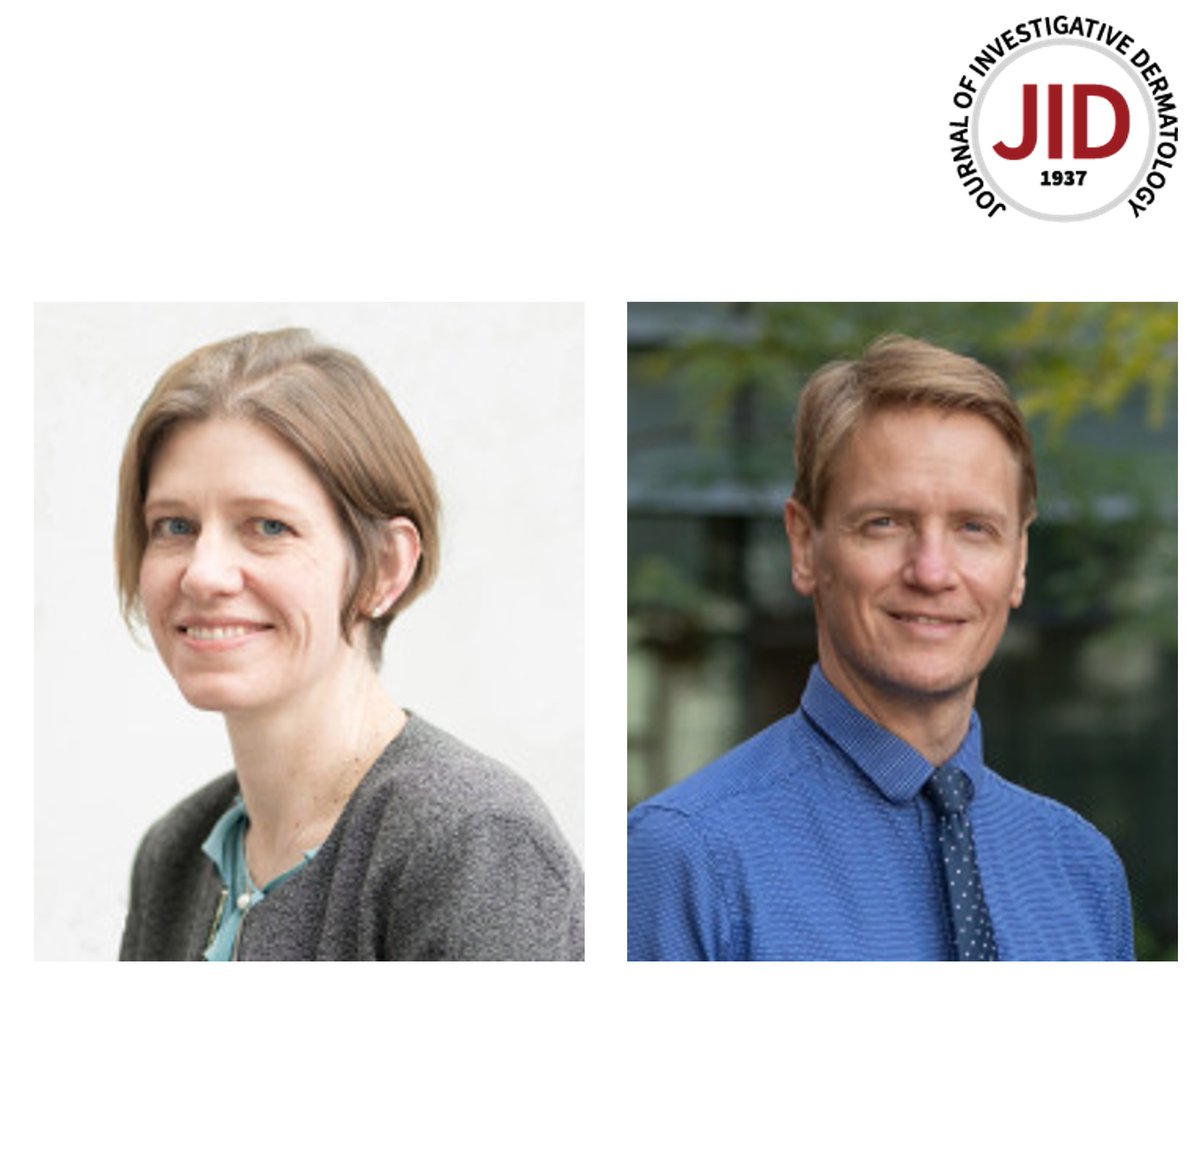 Read the May issue Editorial from JID Editors Sara J Brown (MTSR Editor) @drsarabrown and Johann E Gudjonsson (Reviews Editor):
Halting the Vicious Cycle of #atopicdermatitis: Empowered by Scientific Understanding
doi.org/10.1016/j.jid.…

#dermtwitter #dermatology #dermscience